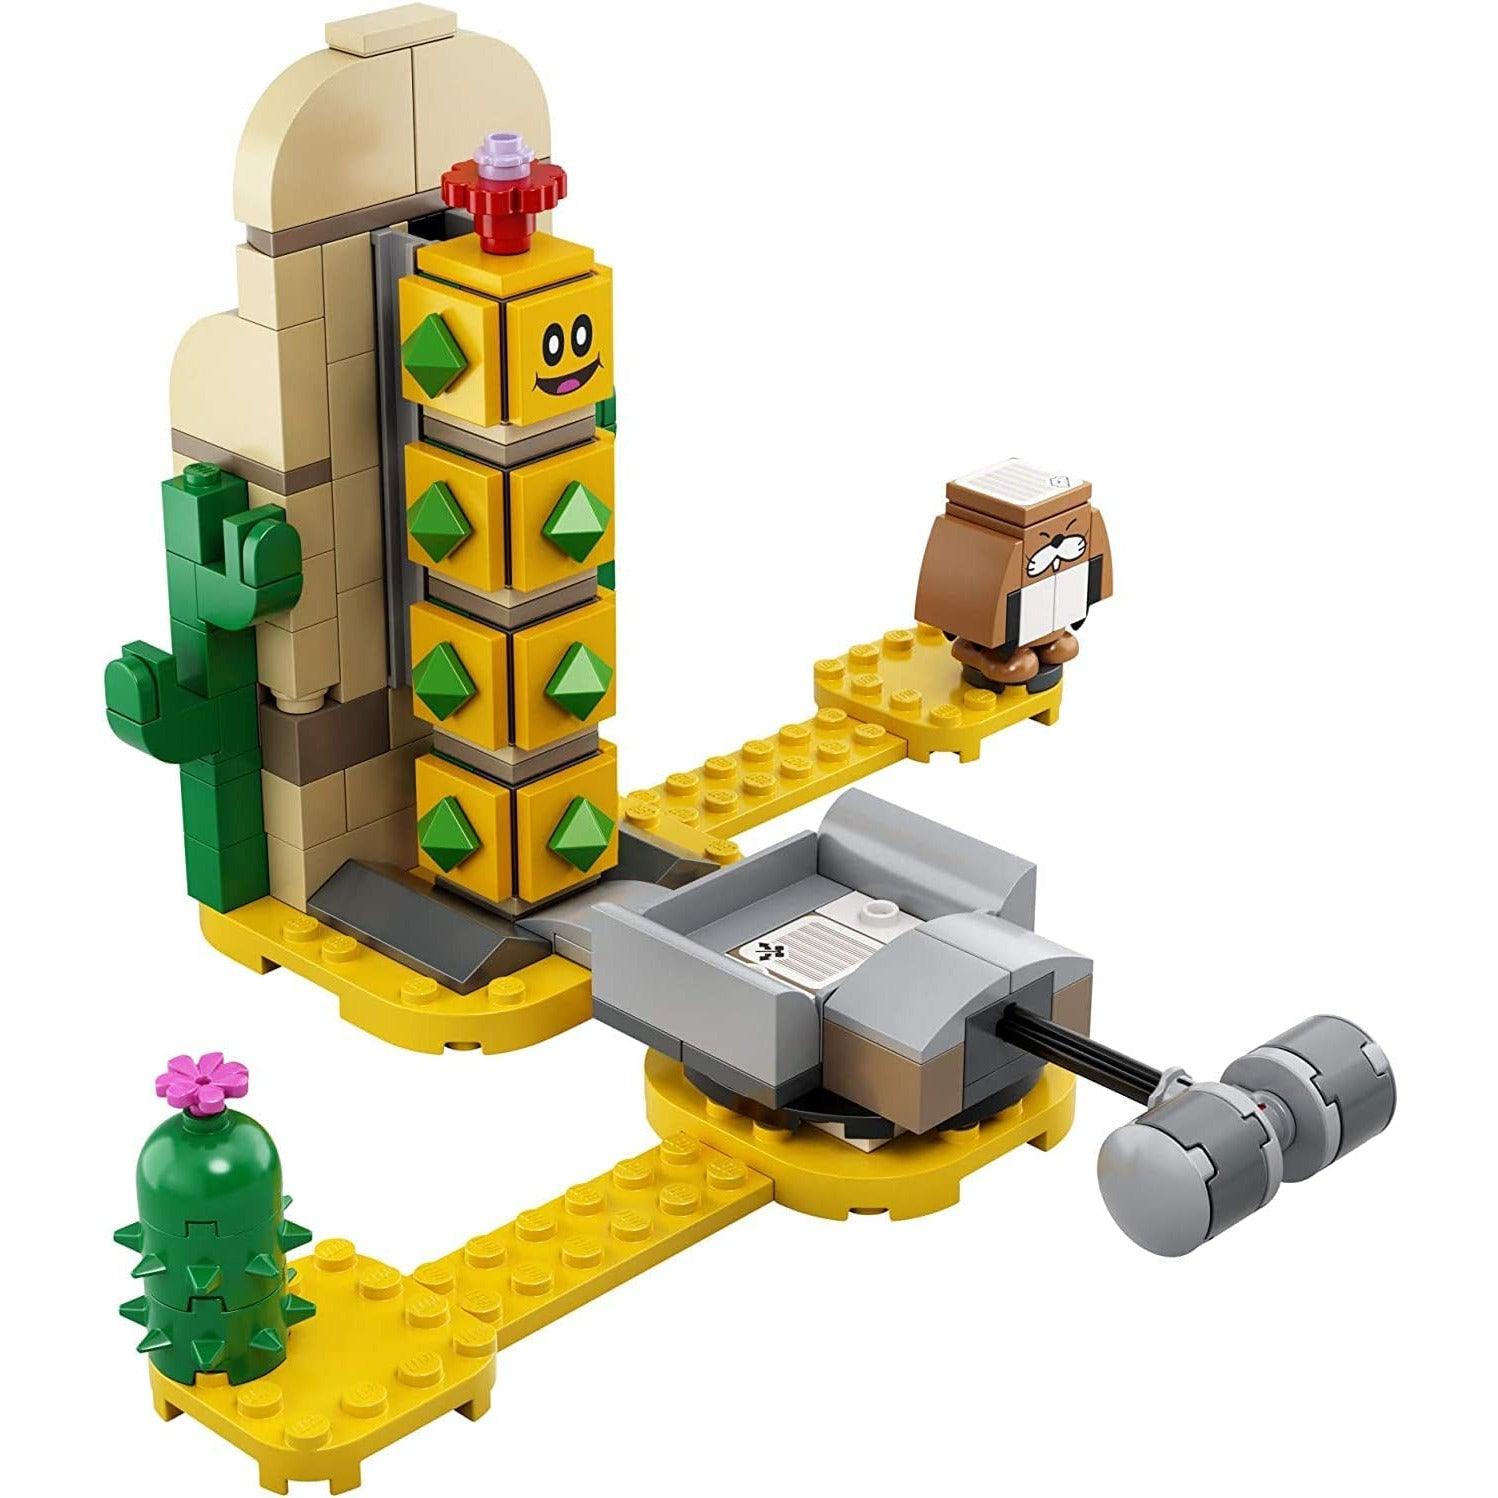 LEGO Super Mario Desert Pokey Expansion Set 71363 Building Kit; Toy for Creative Kids to Combine with The Super Mario Adventures with Mario Starter Course (71360) Playset (180 Pieces) - BumbleToys - 6+ Years, Boys, Lego, Super Mario, Toy Land